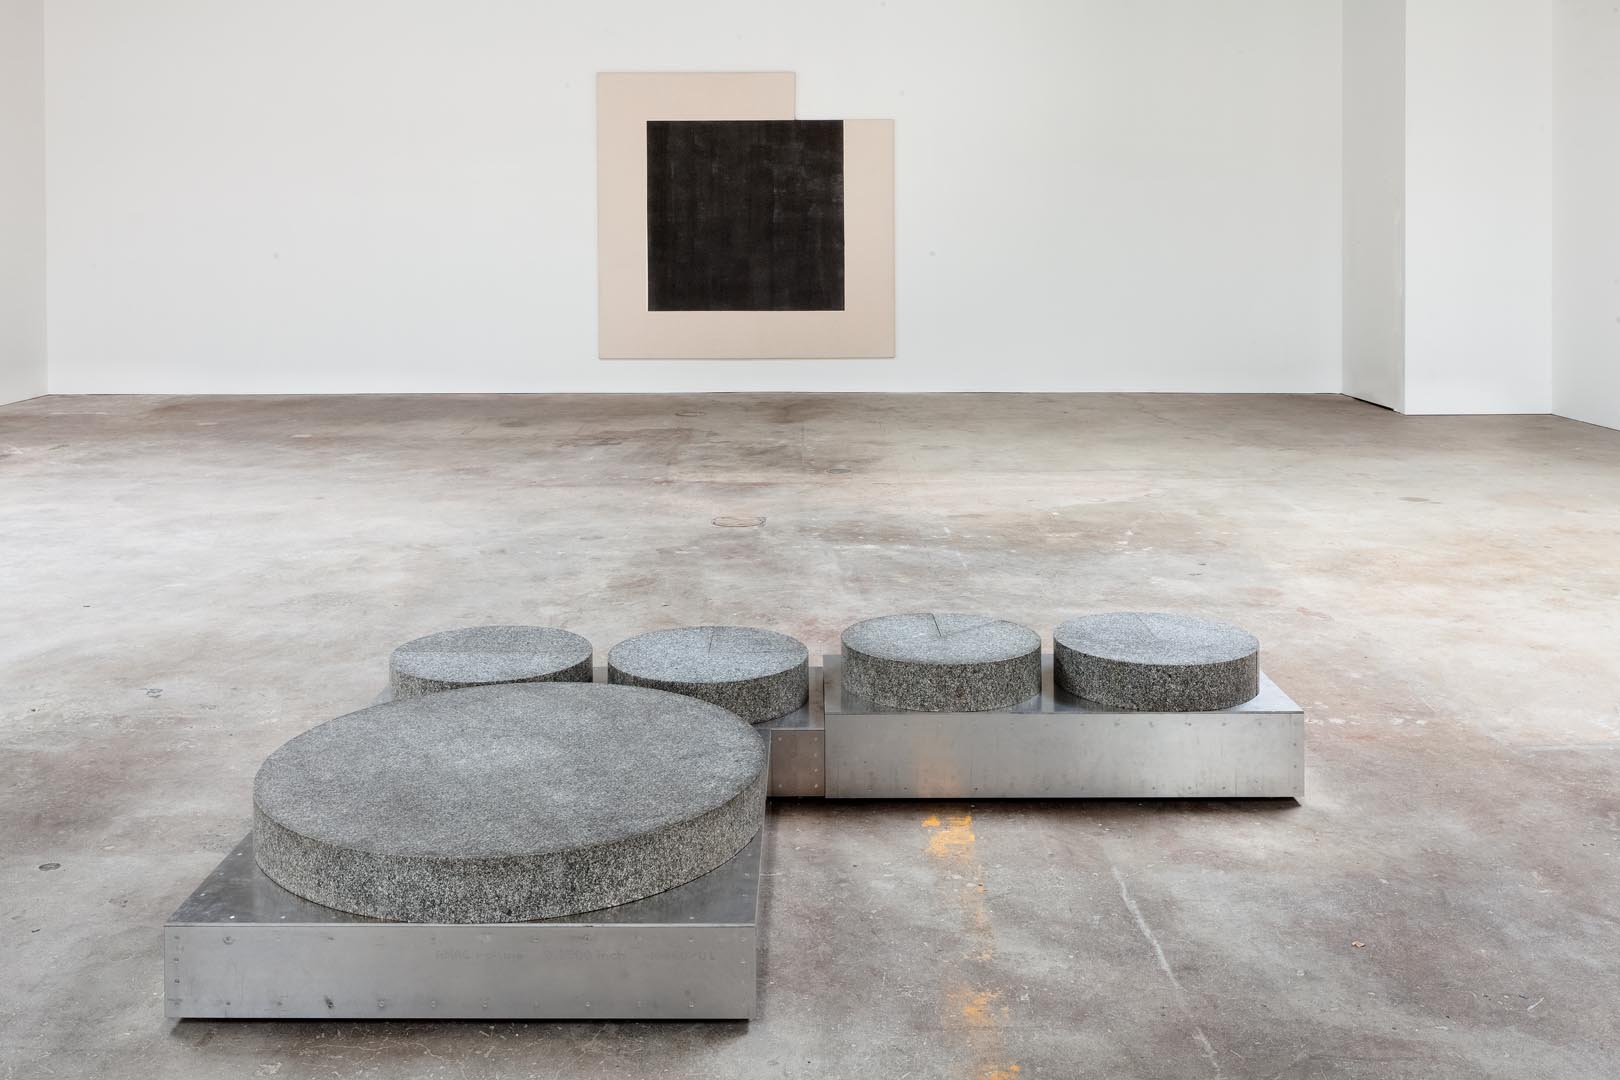 Michael Heizer: Works from the 1960s and 70s | David Zwirner